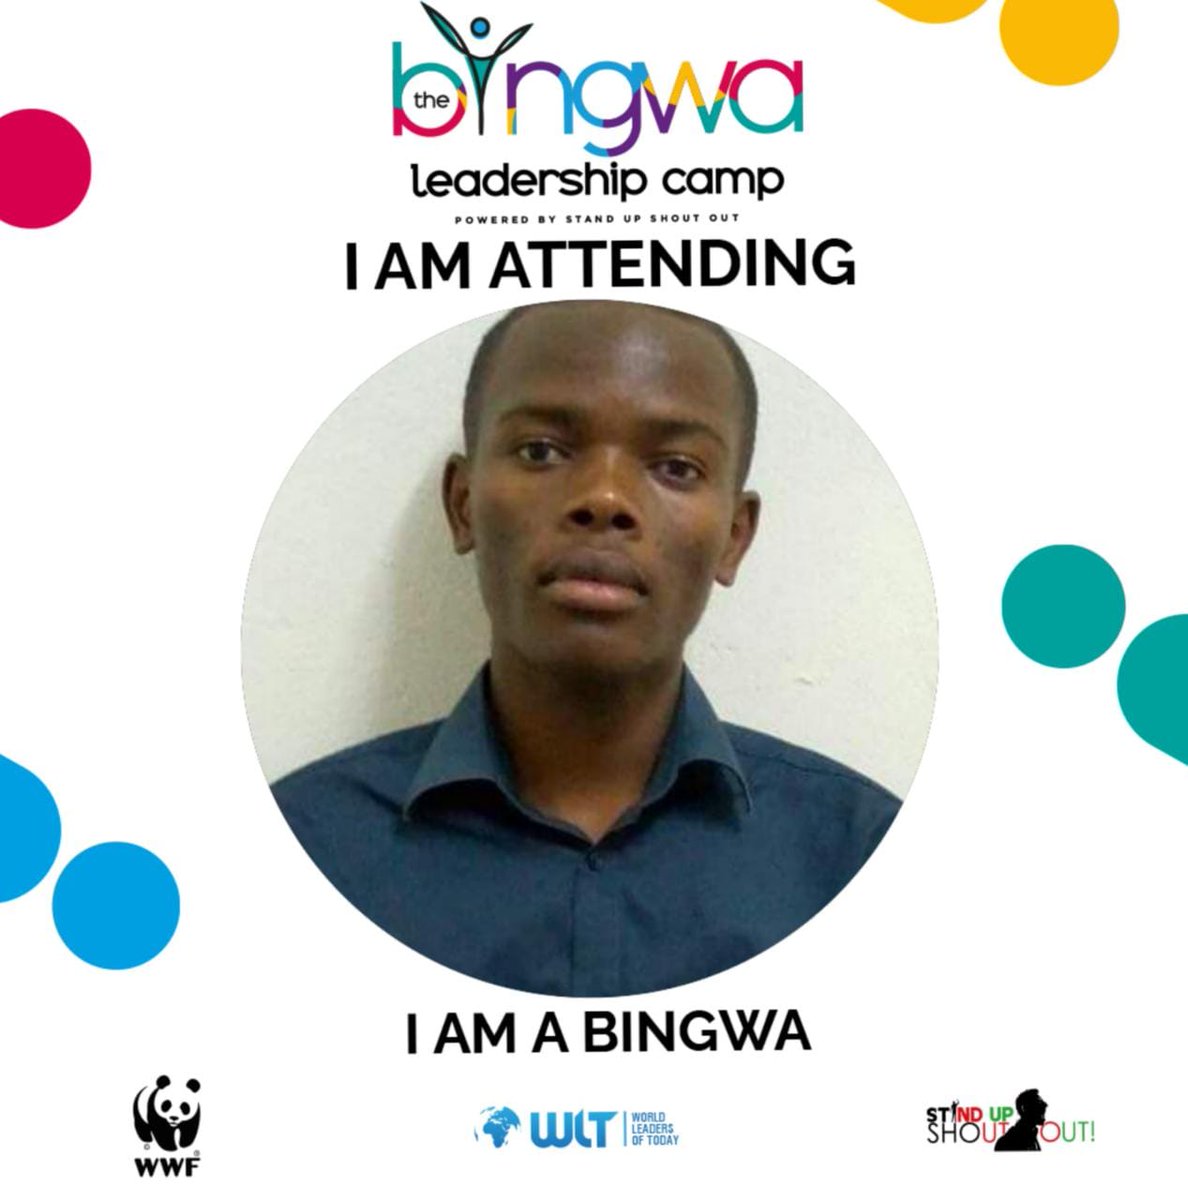 Serve your gift serve your people and God will bless you that's why am a #Bingwa
@MrPmoll  @SUSOyouth